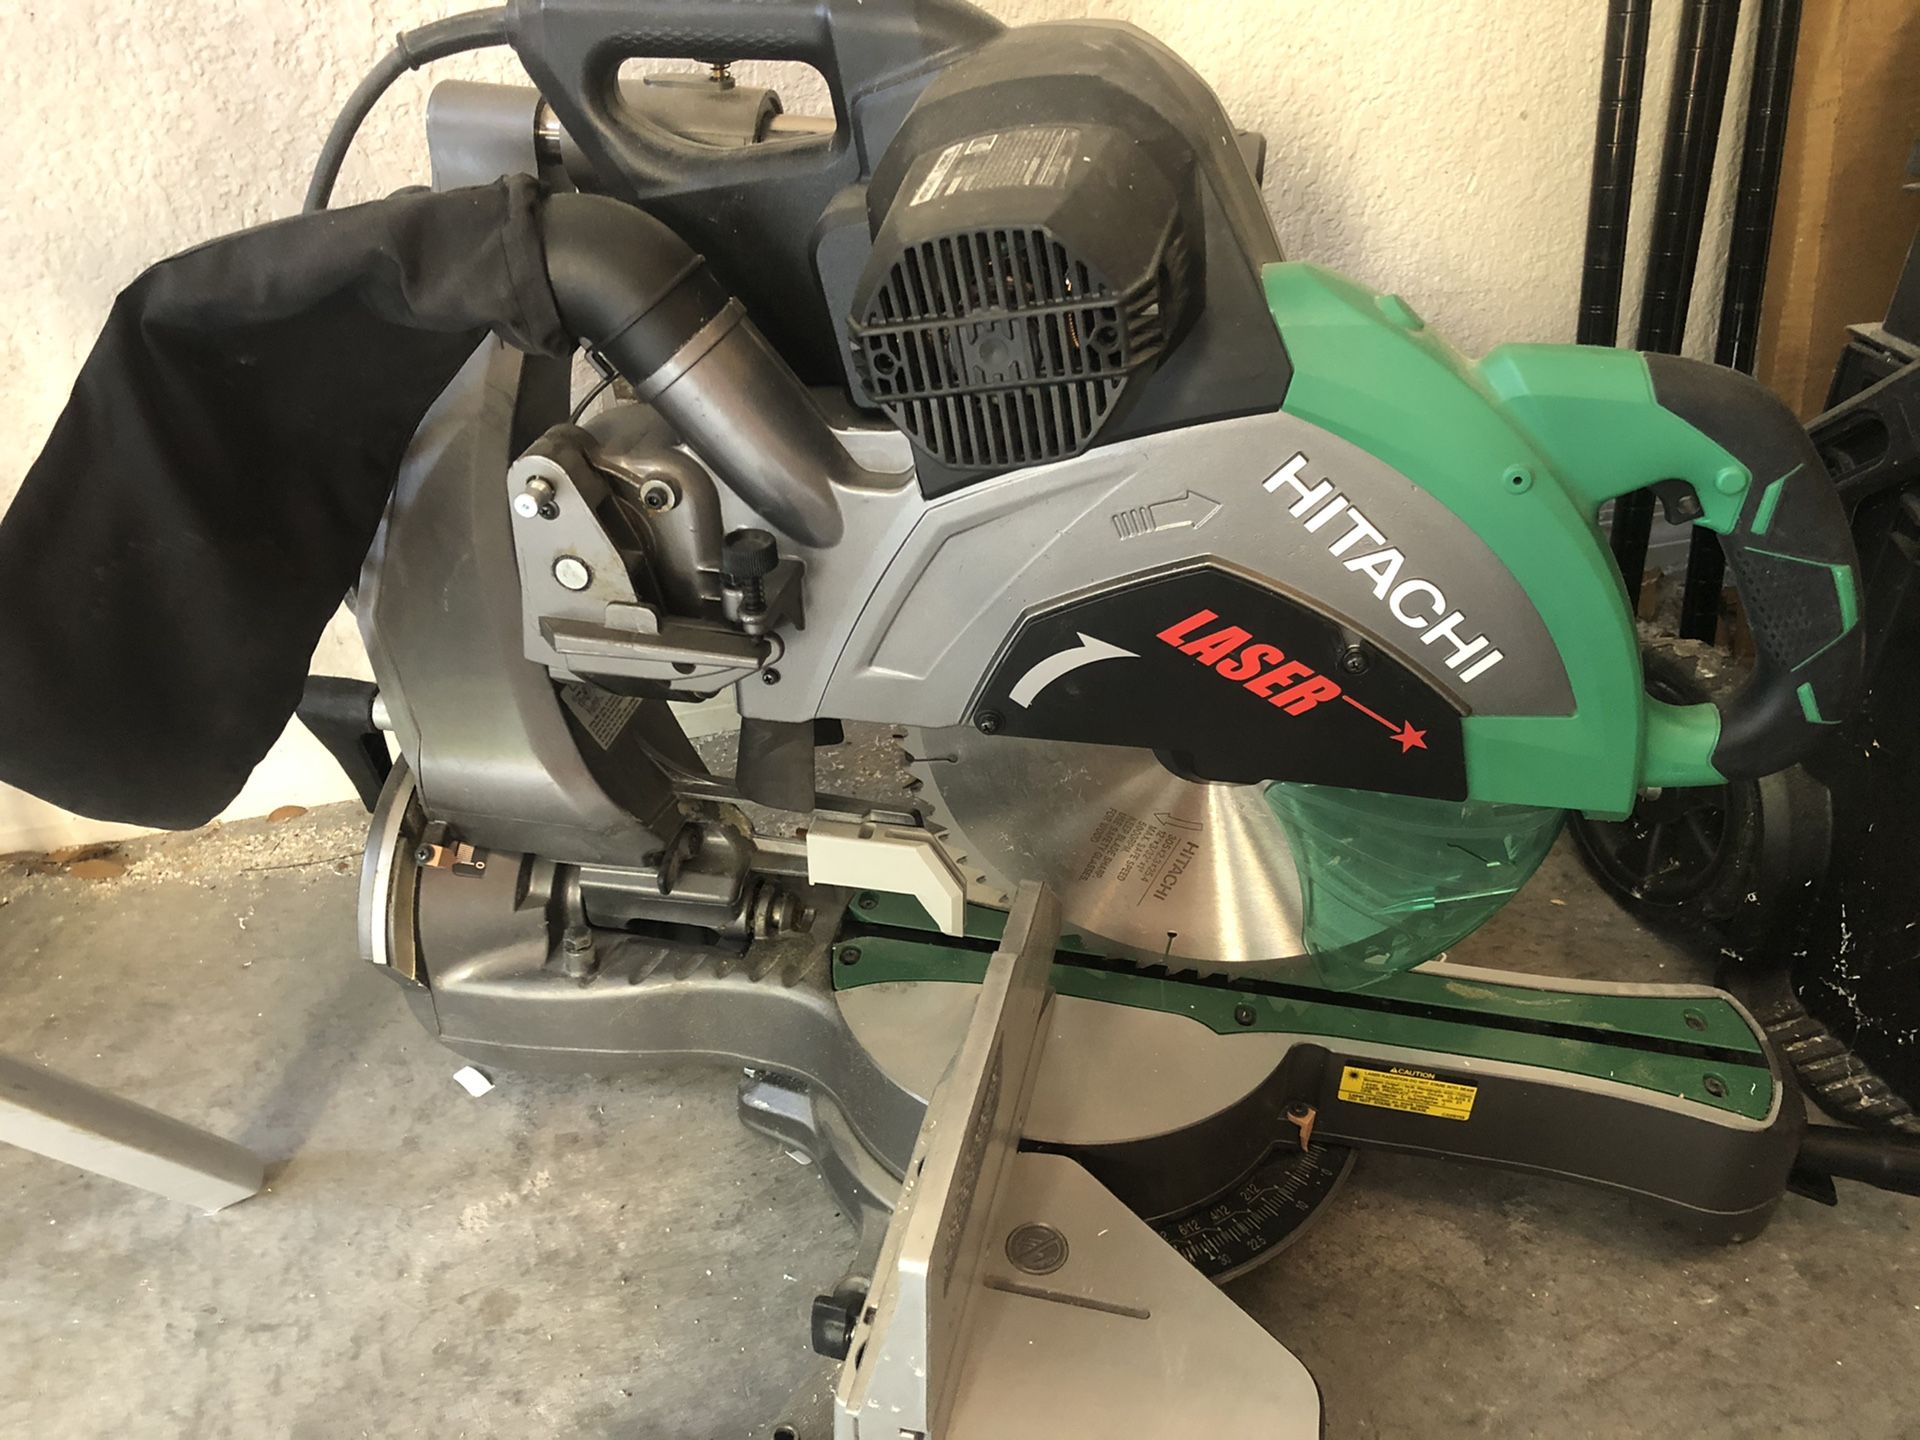 New 12” Dual bevel compound sliding miter saw with laser